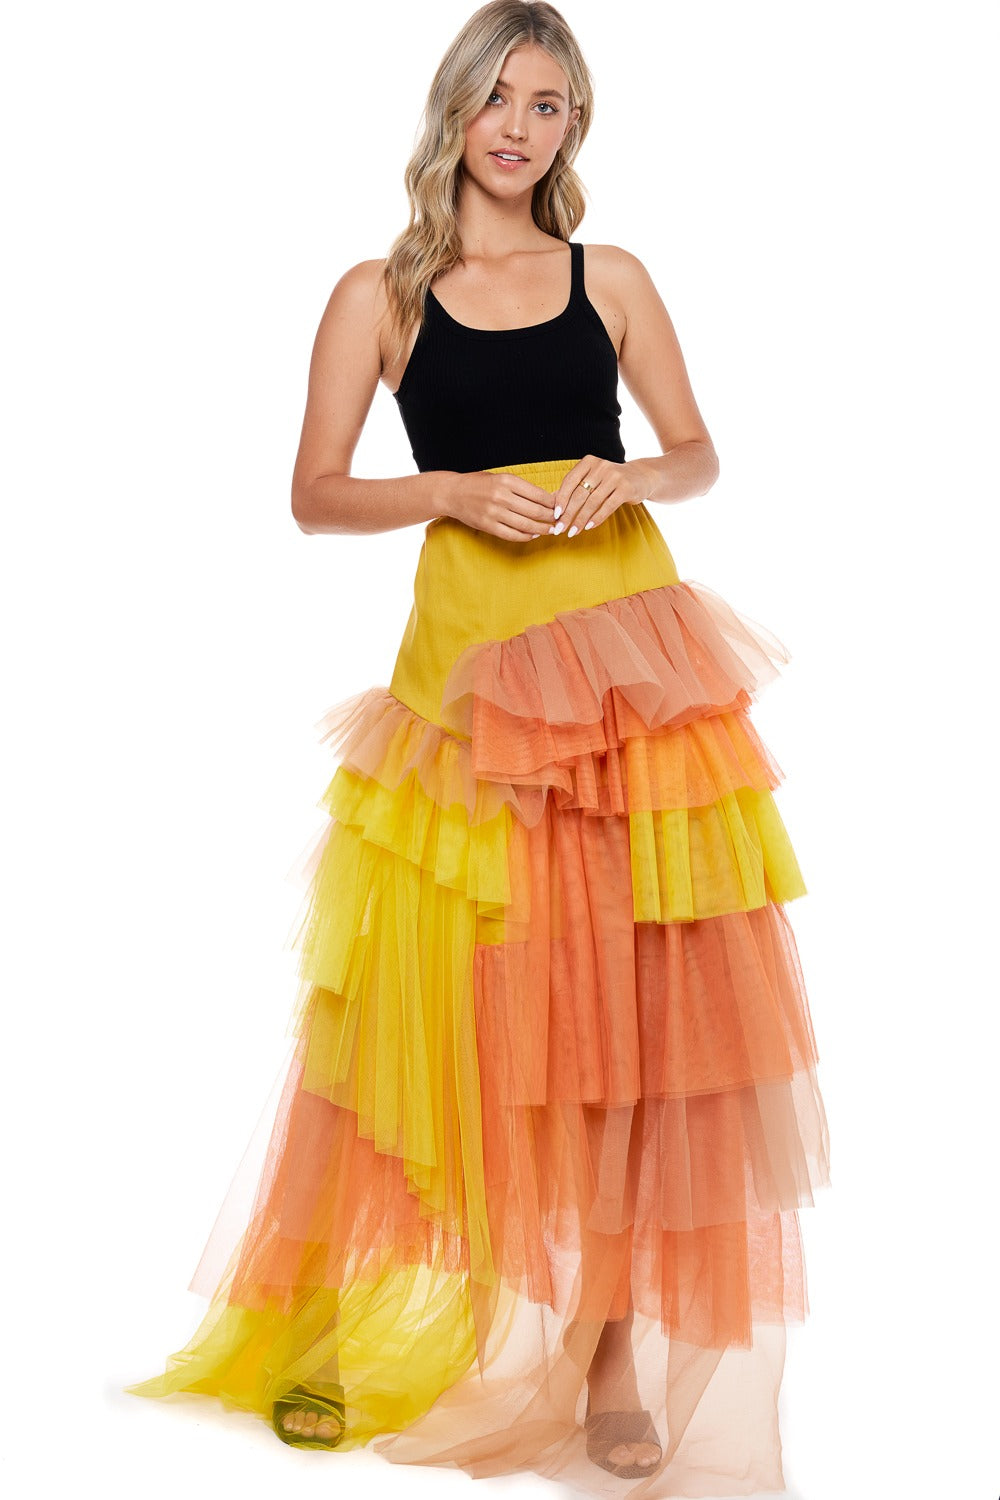 Tiered Tulle Maxi Skirt - Girl Boss Fashions & Accessories LLC